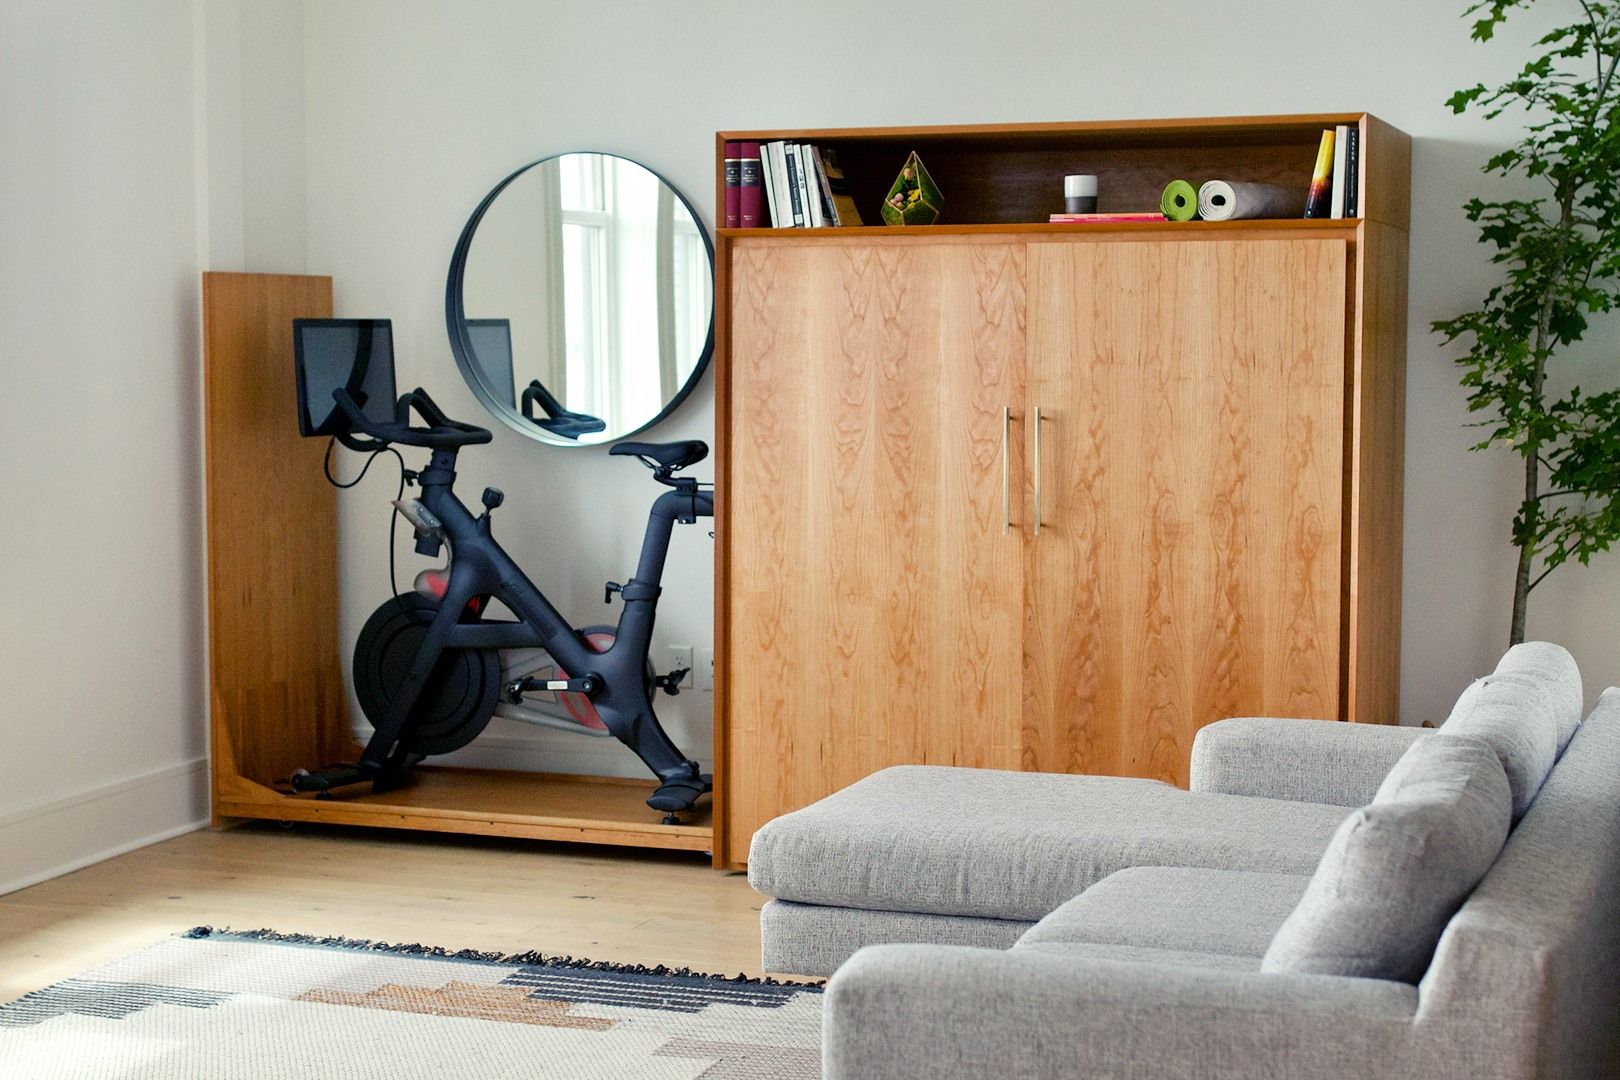 How To Hide Exercise Bike In Living Room